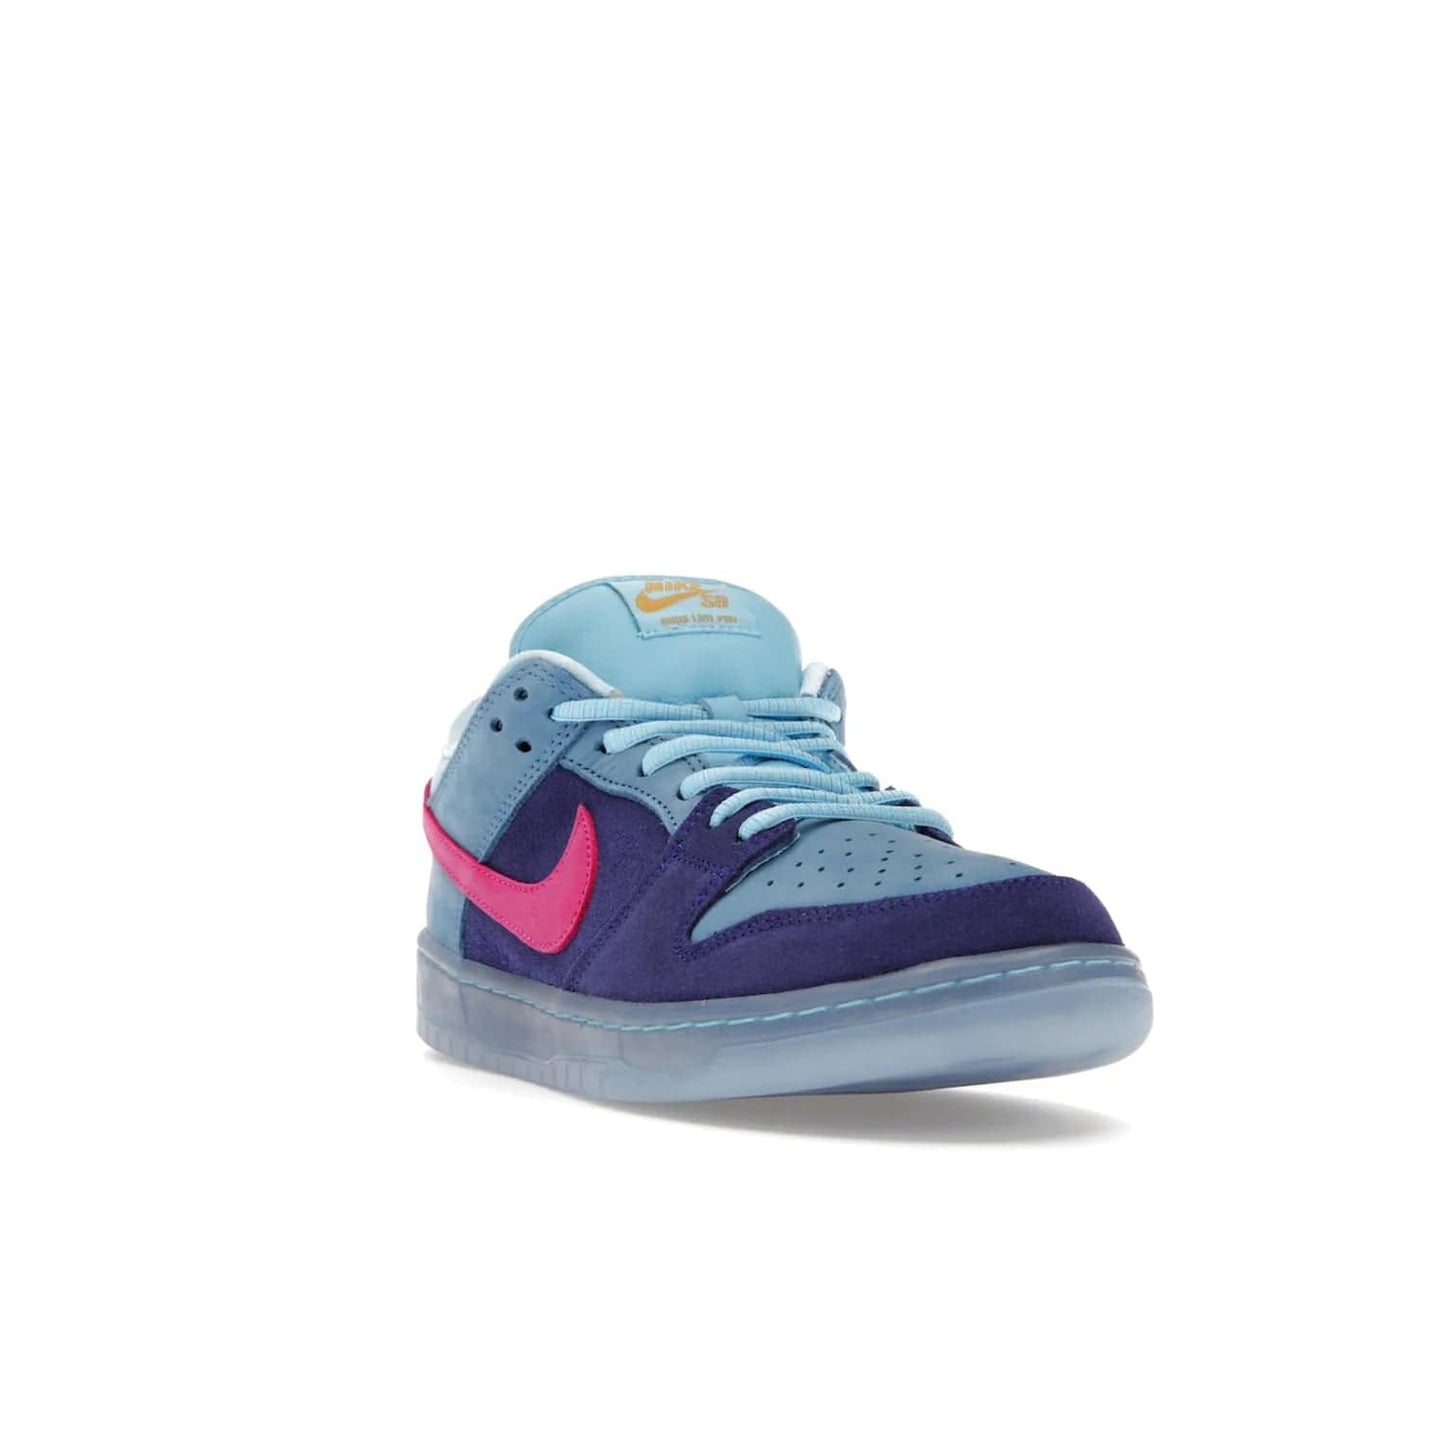 Nike SB Dunk Low Run The Jewels - Image 7 - Only at www.BallersClubKickz.com - The Nike SB Dunk Low Run The Jewels pays tribute to the Run the Jewels 3 album cover. It features a blue suede upper with pink suede accents, gold branding and 3 lace sets. RTJ insoles complete this limited edition sneaker. Get it now for your shoe collection.